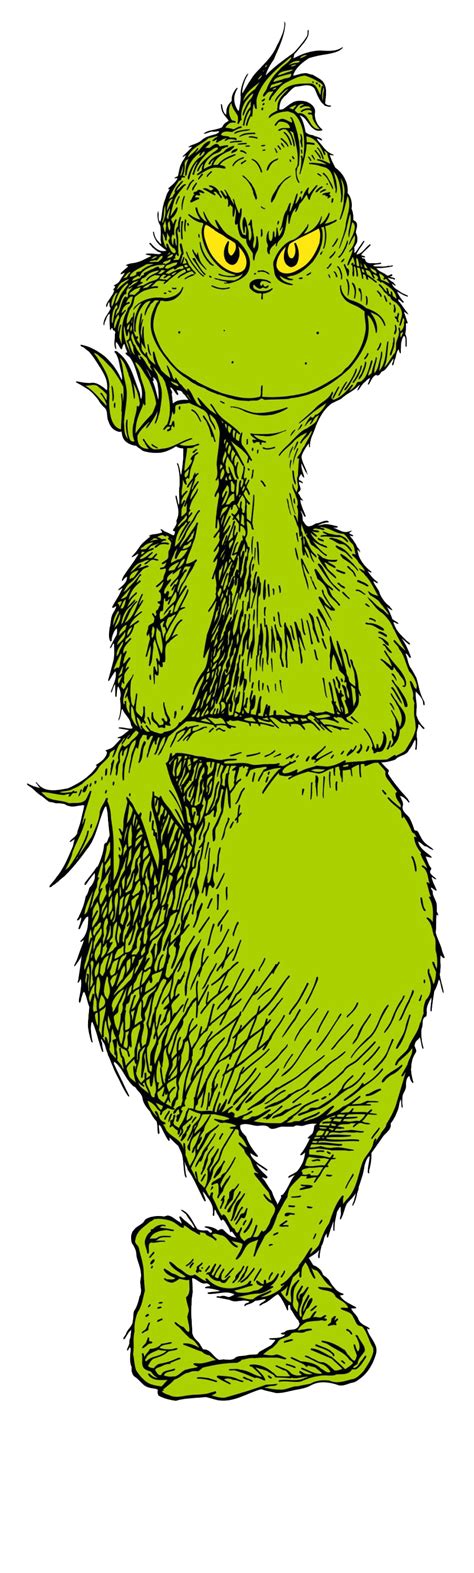 The Grinch Png Photos Transparent Png Image Pngnice